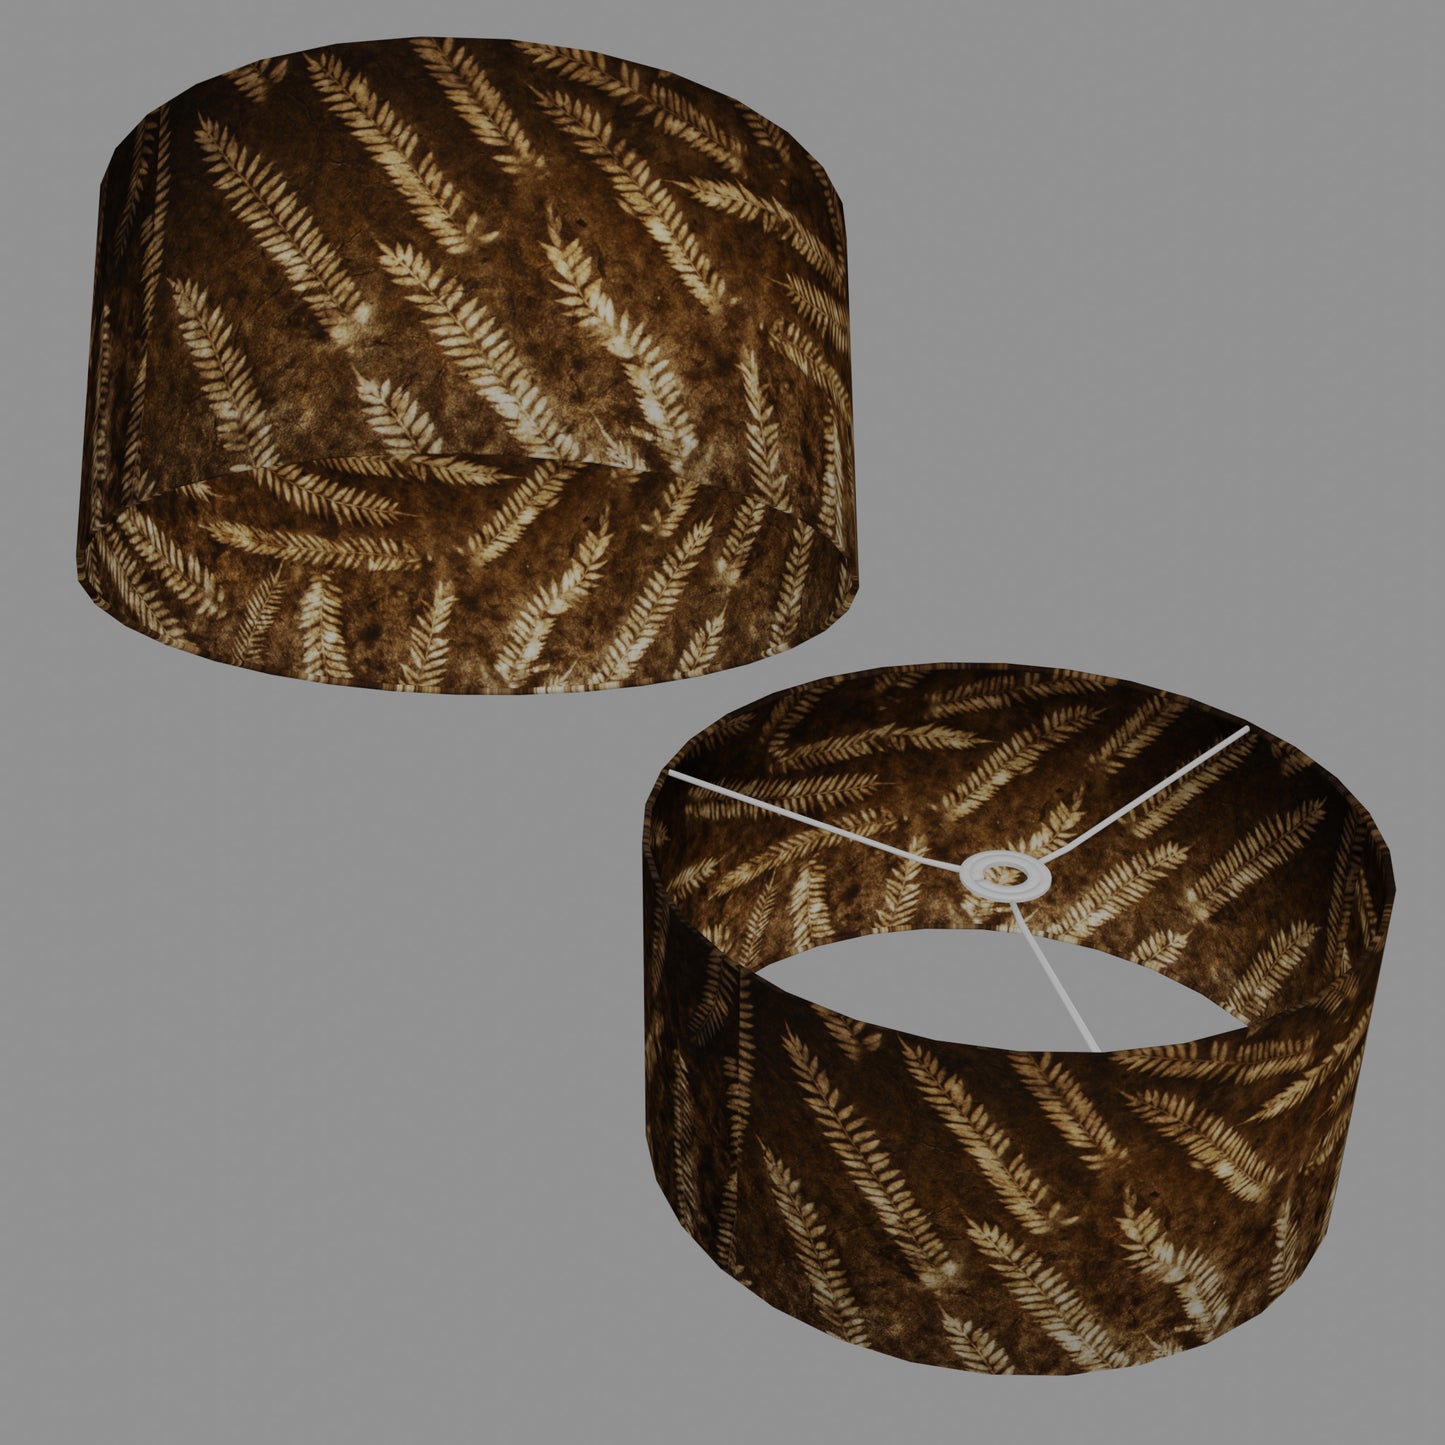 Drum Lamp Shade - P26 - Resistance Dyed Brown Fern, 40cm(d) x 20cm(h)